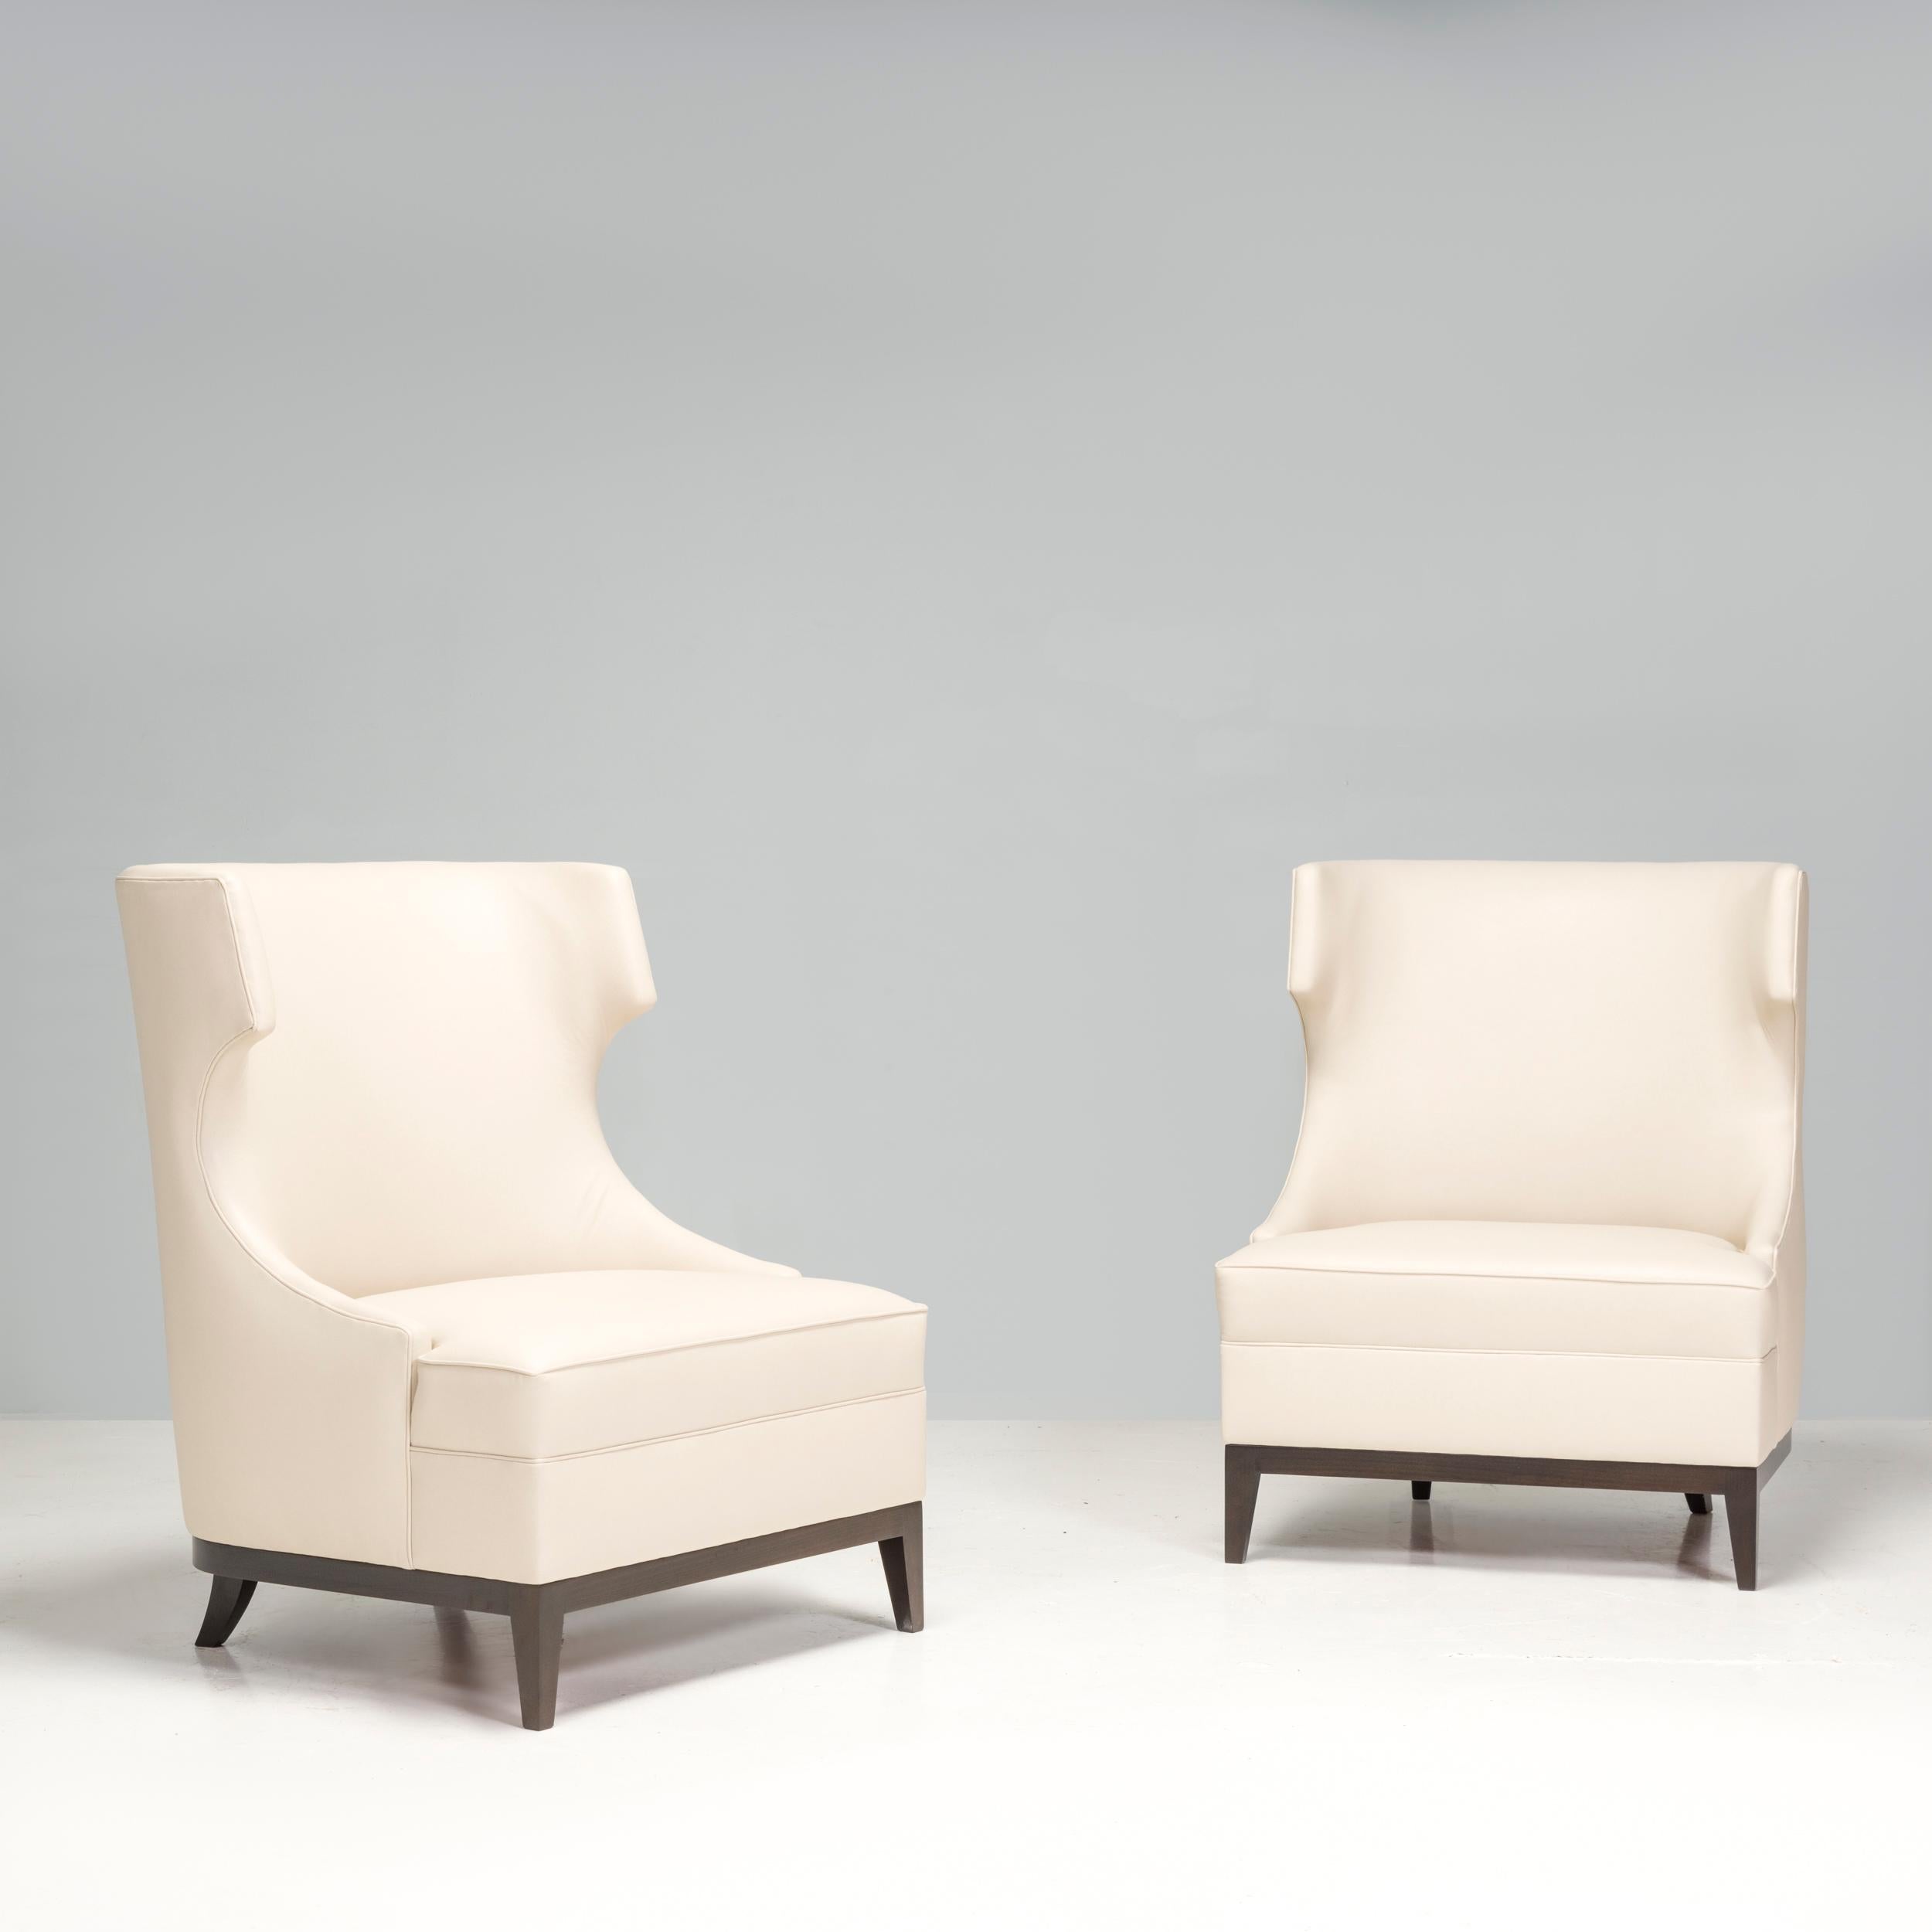 These cream leather high back armchairs have an impressive design that would elevate any living space or bedroom. Its neutral colour palette means it would harmonise well with a range of interior aesthetics.

Elegantly crafted with wingback